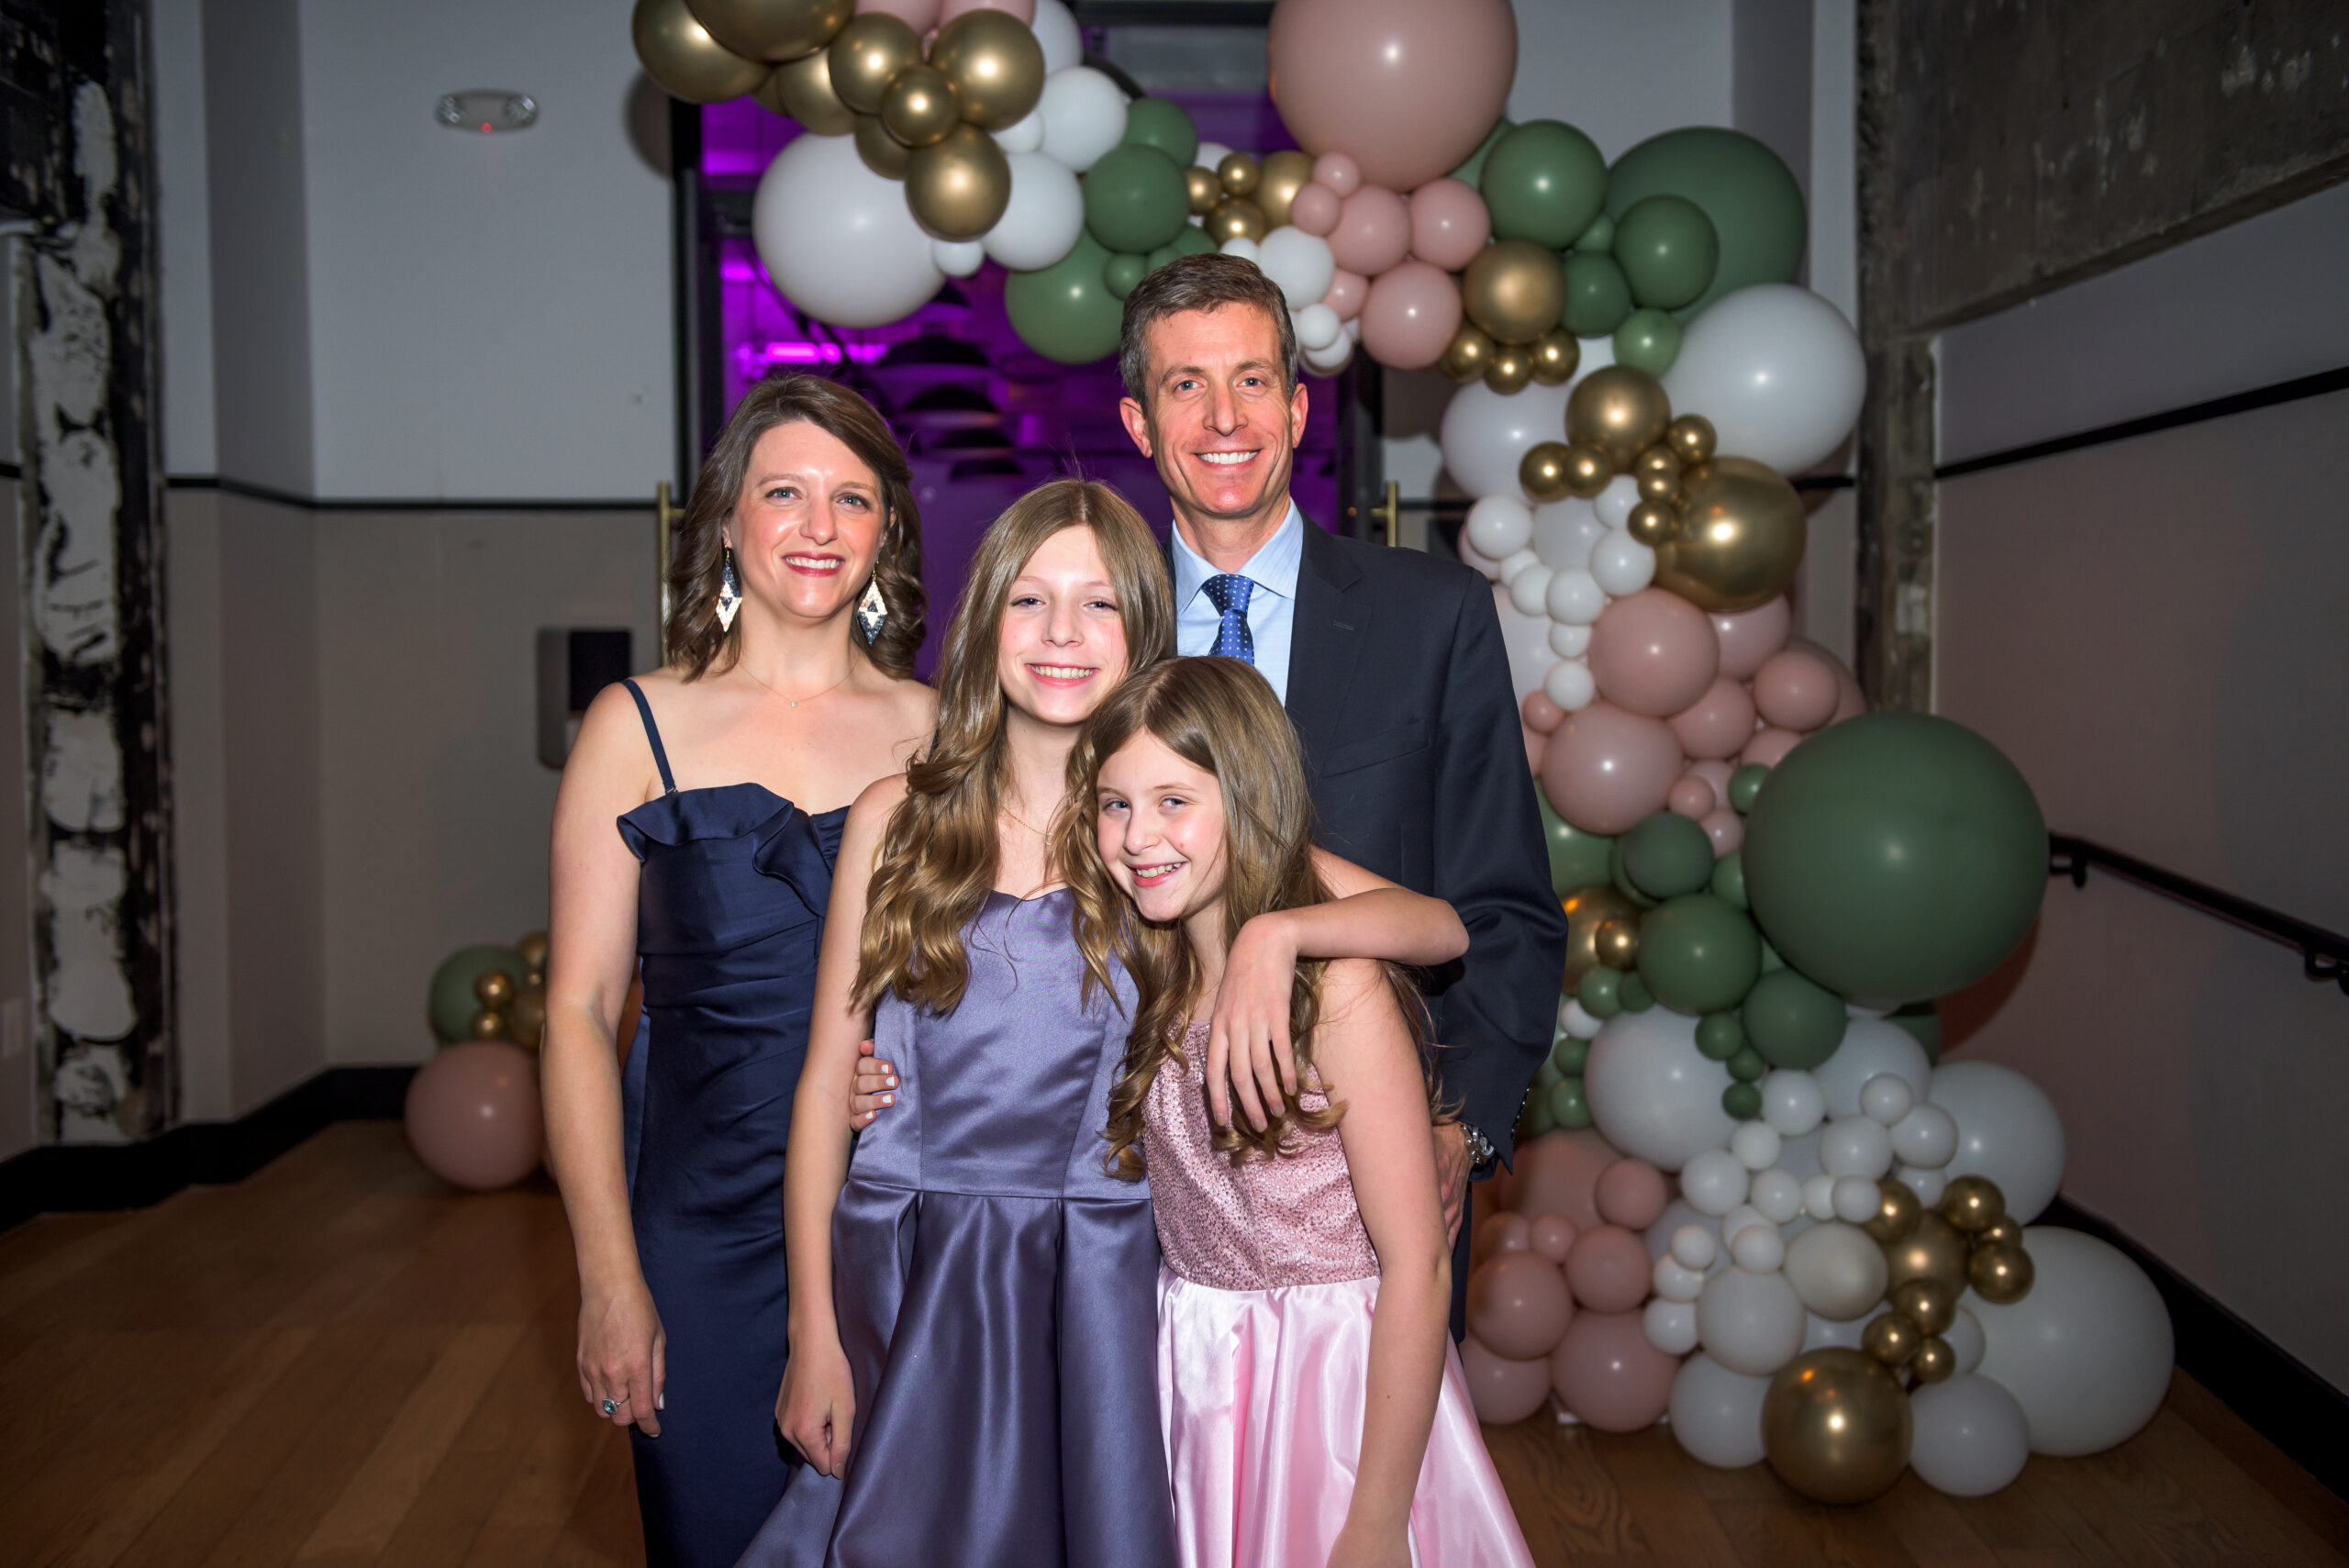 Hannah's Sophisticated Bat Mitzvah Soiree at Eaton DC | Pop Color Events | Adding a Pop of Color to Bar & Bat Mitzvahs in DC, MD & VA | Photo by: Jacie Lee Almira Photography